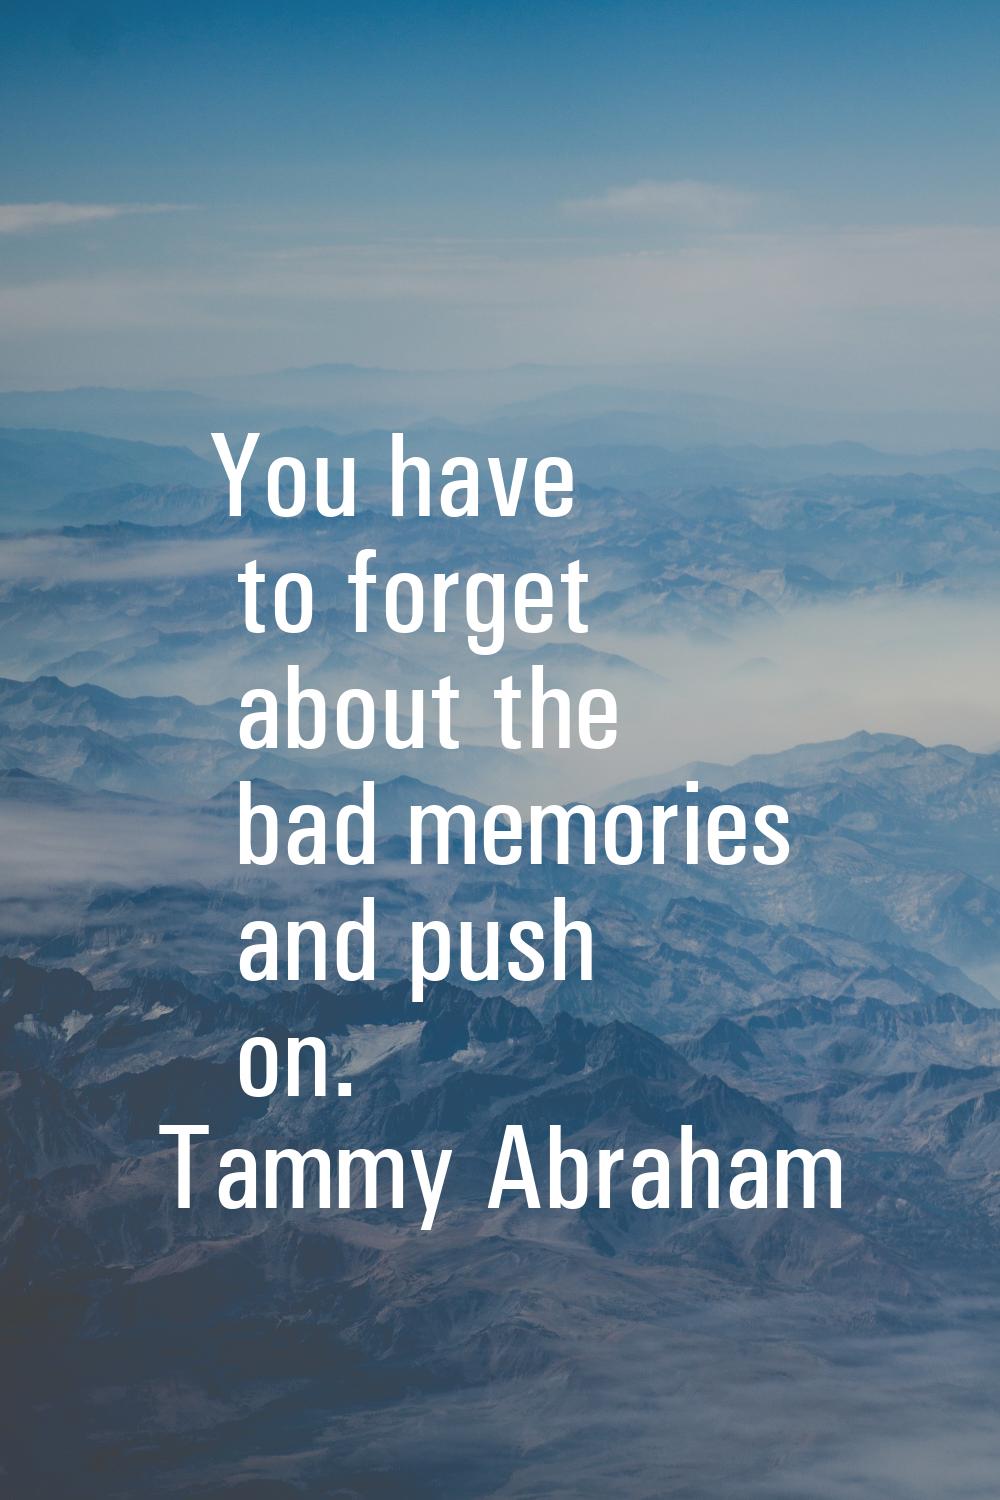 You have to forget about the bad memories and push on.